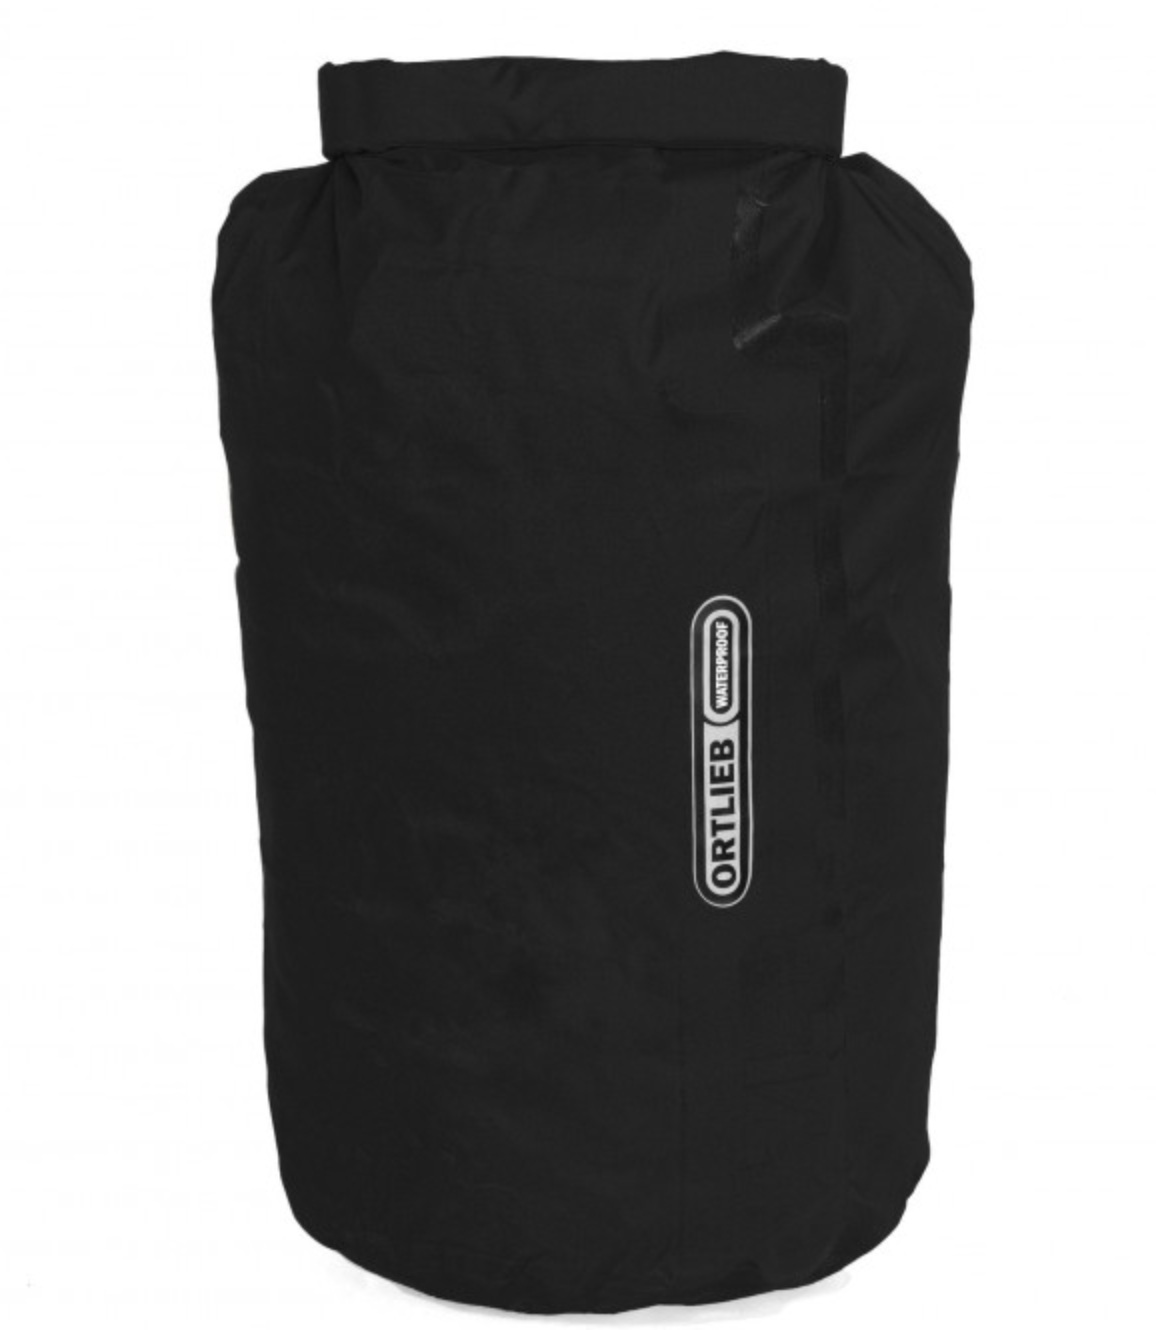 Ortlieb Light Weight Dry-Bag - Colour - Black